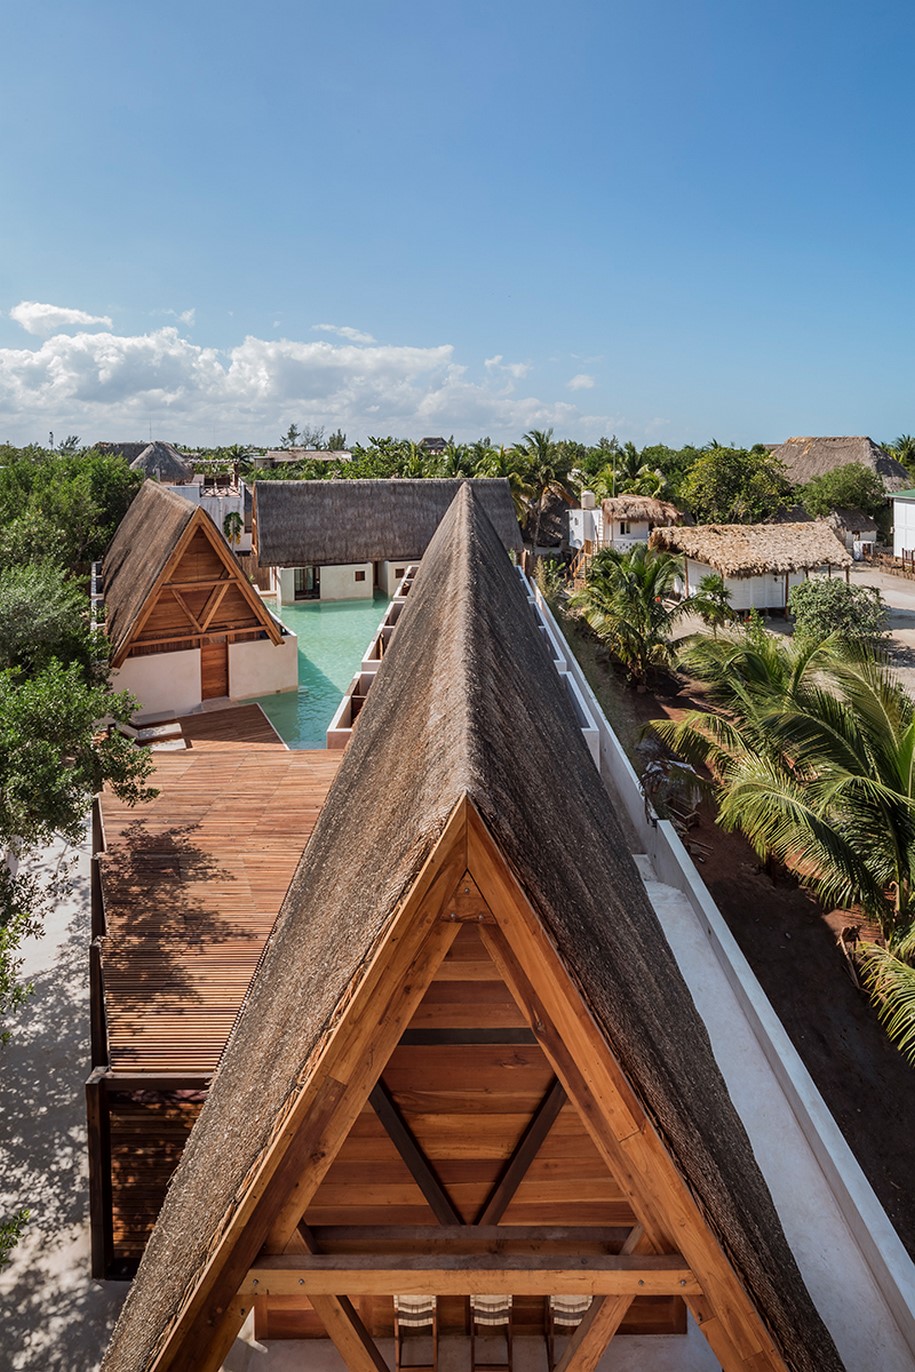 Archisearch PUNTA CALIZA Hotel Holbox by ESTUDIO MACIAS PEREDO takes its cues from the traditional Mayan house